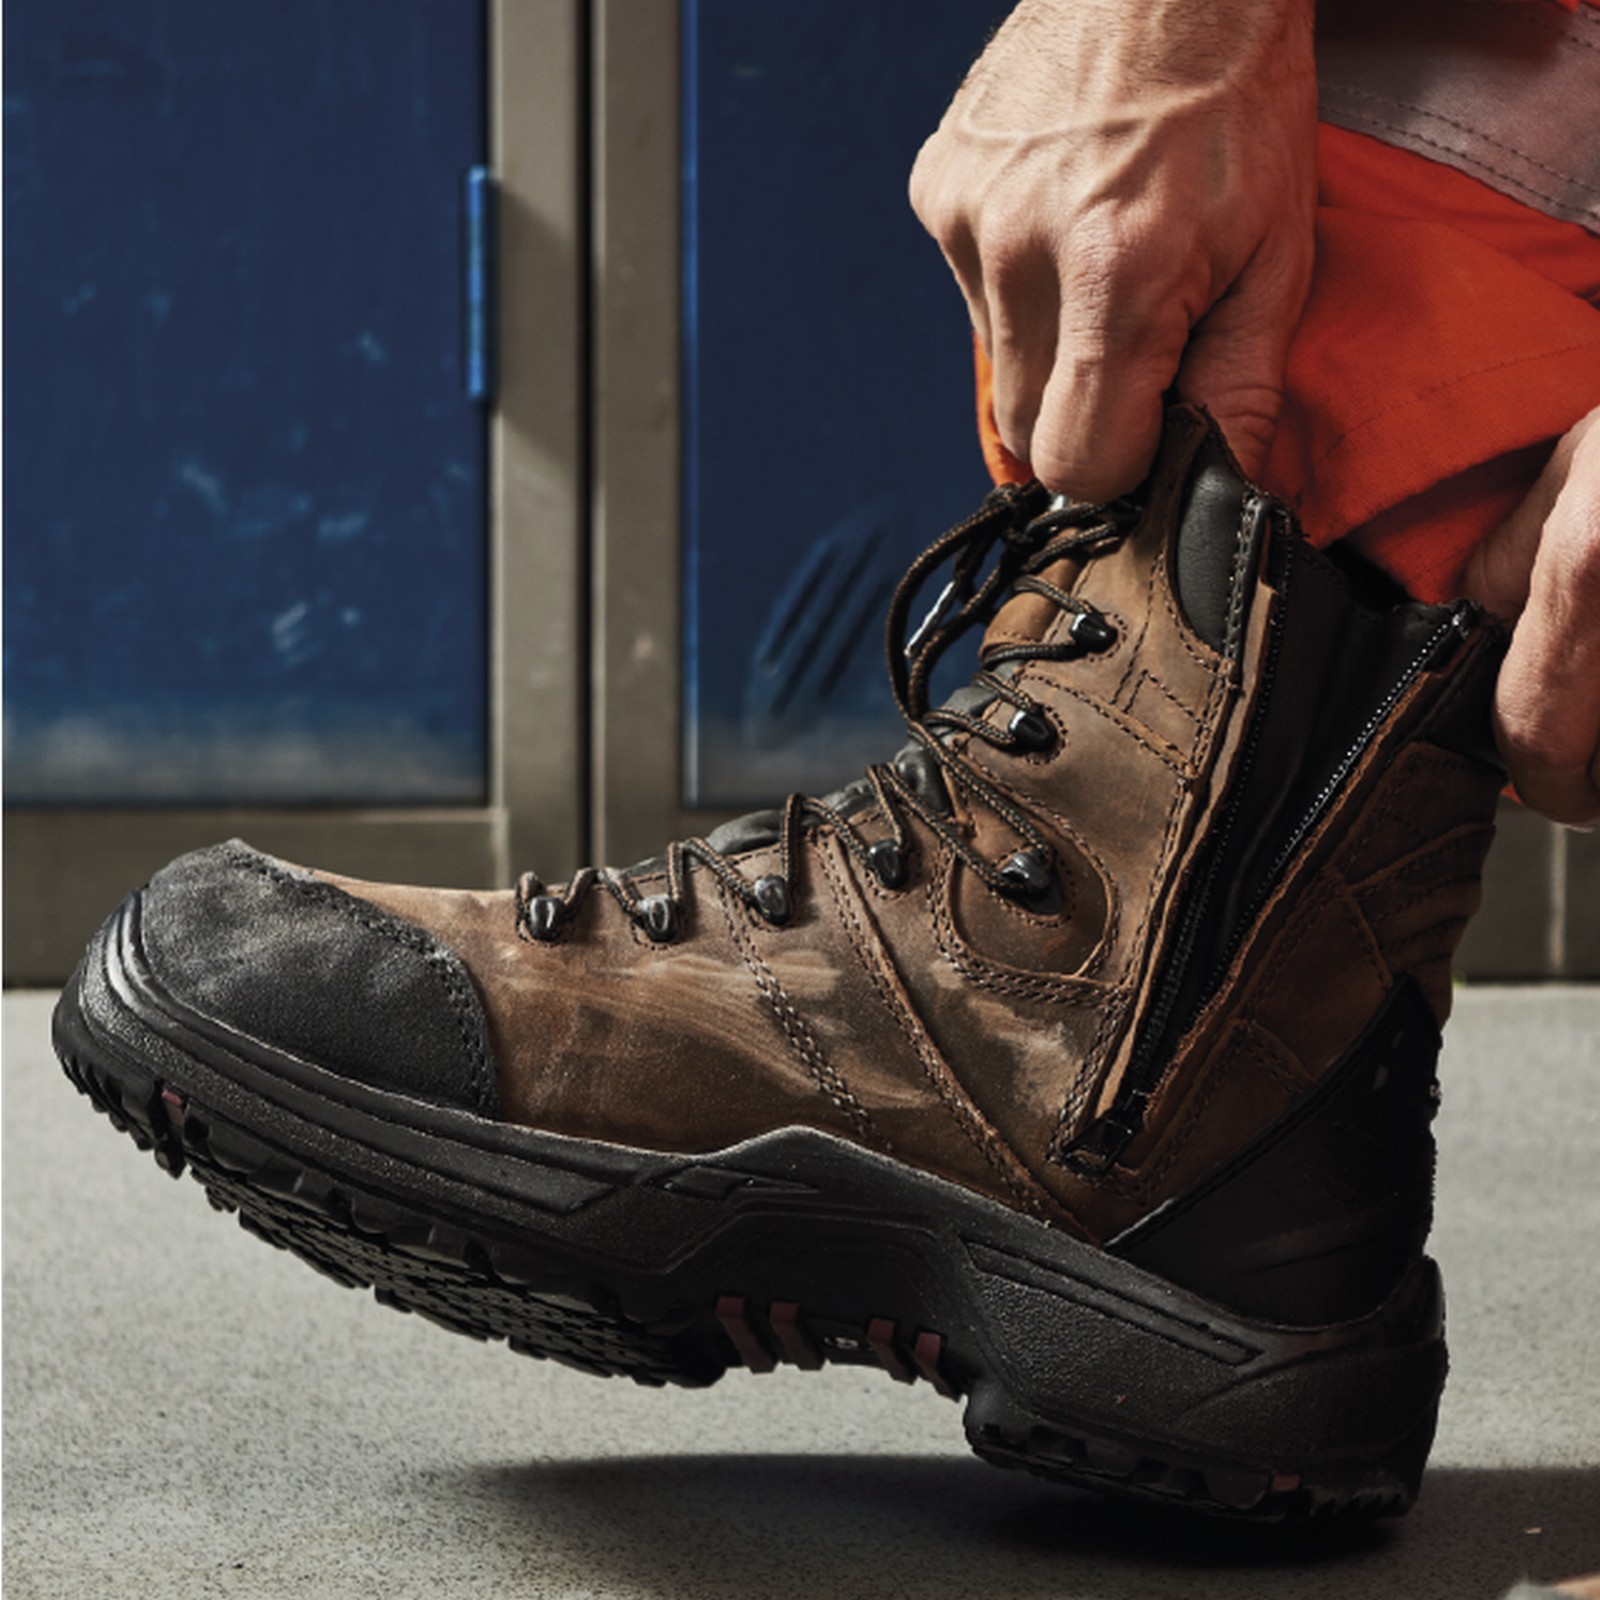 V12 Rocky IGS waterproof safety boot | WISE Worksafe